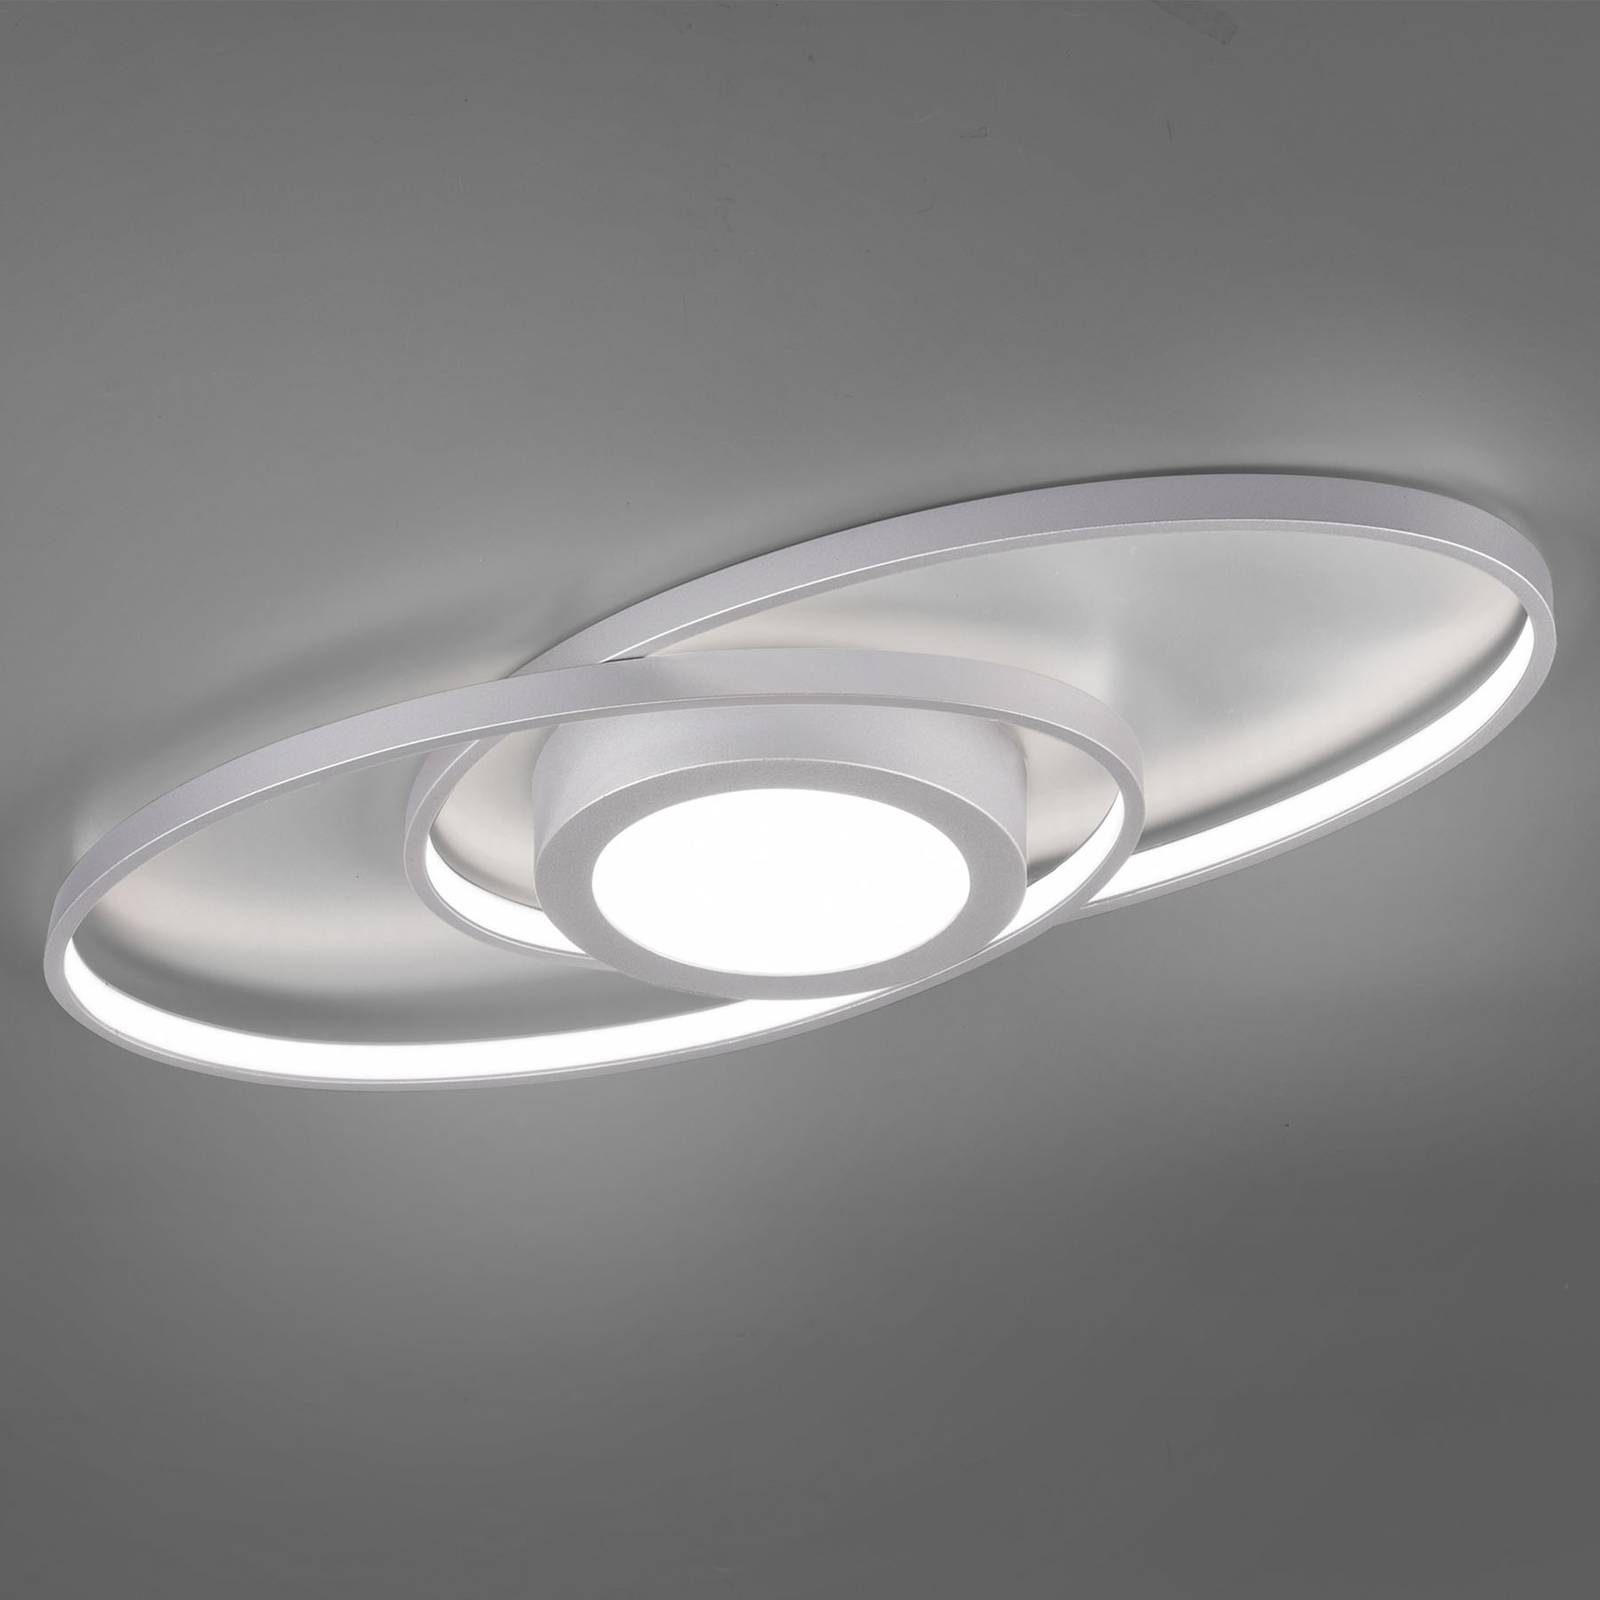 Image of Reality Leuchten Plafonnier LED Galaxy, dimmable, couleur titane 4017807446227